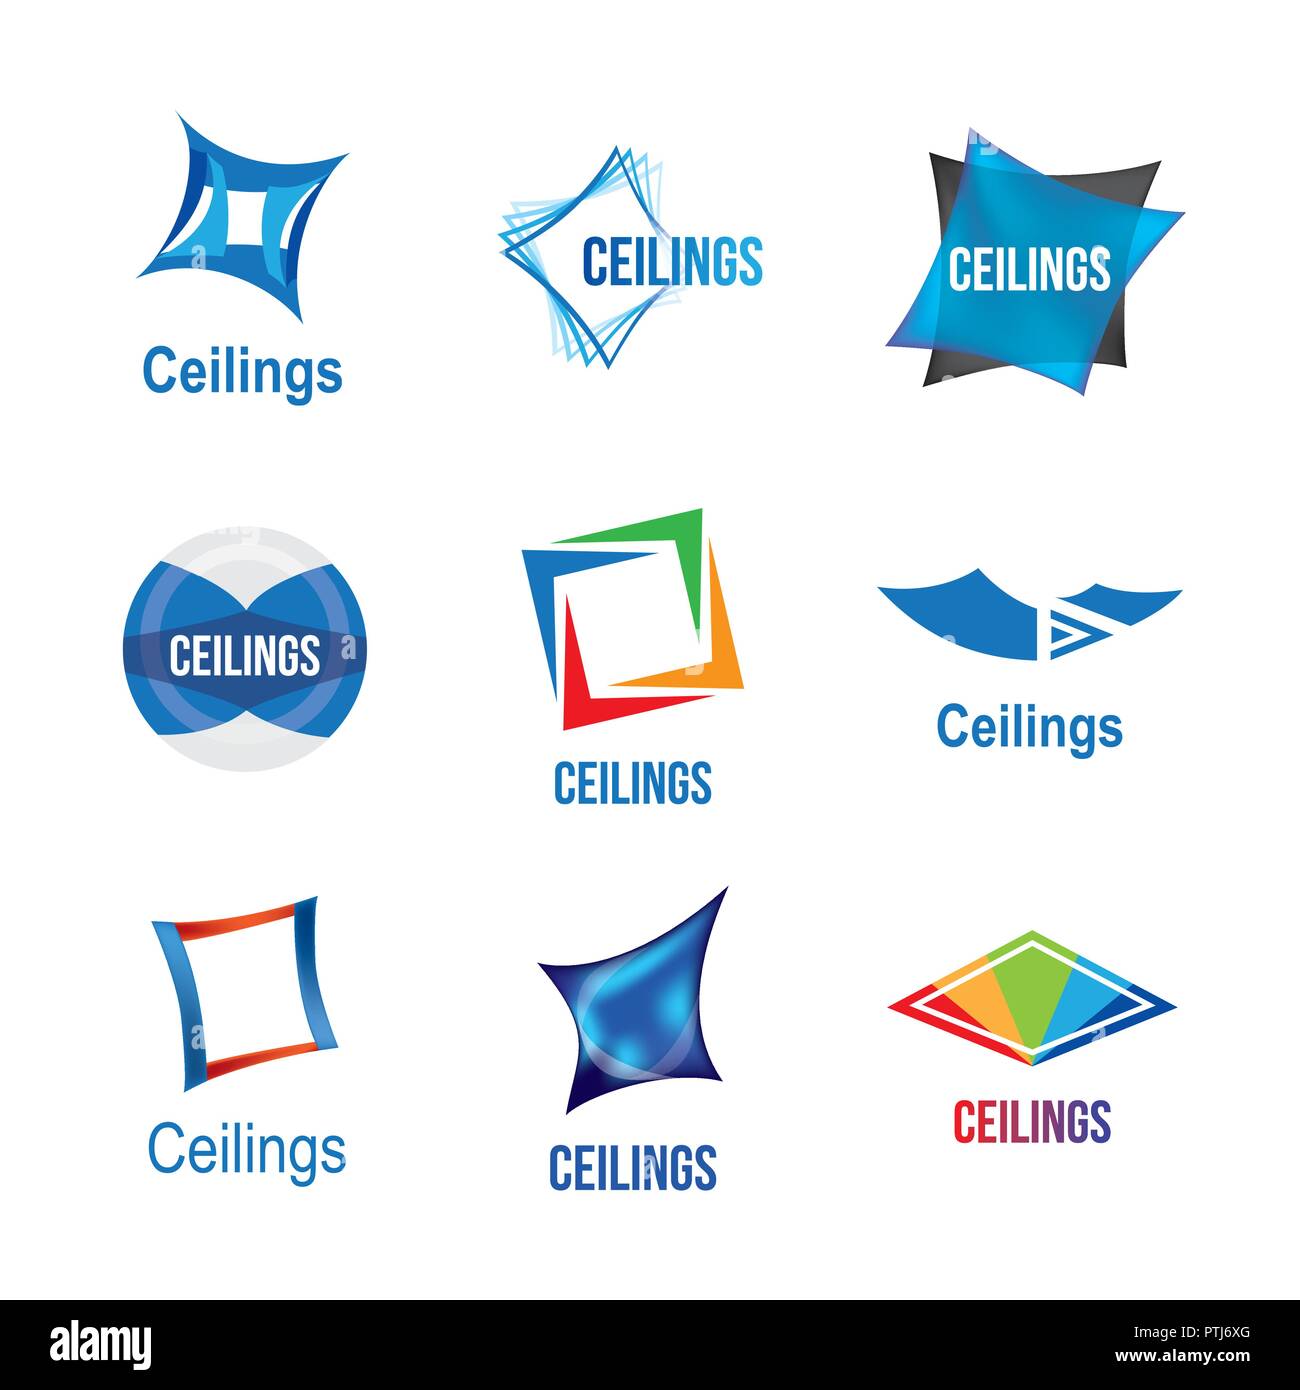 Set of logos for ceilings, tiles and stretch ceilings Stock Vector